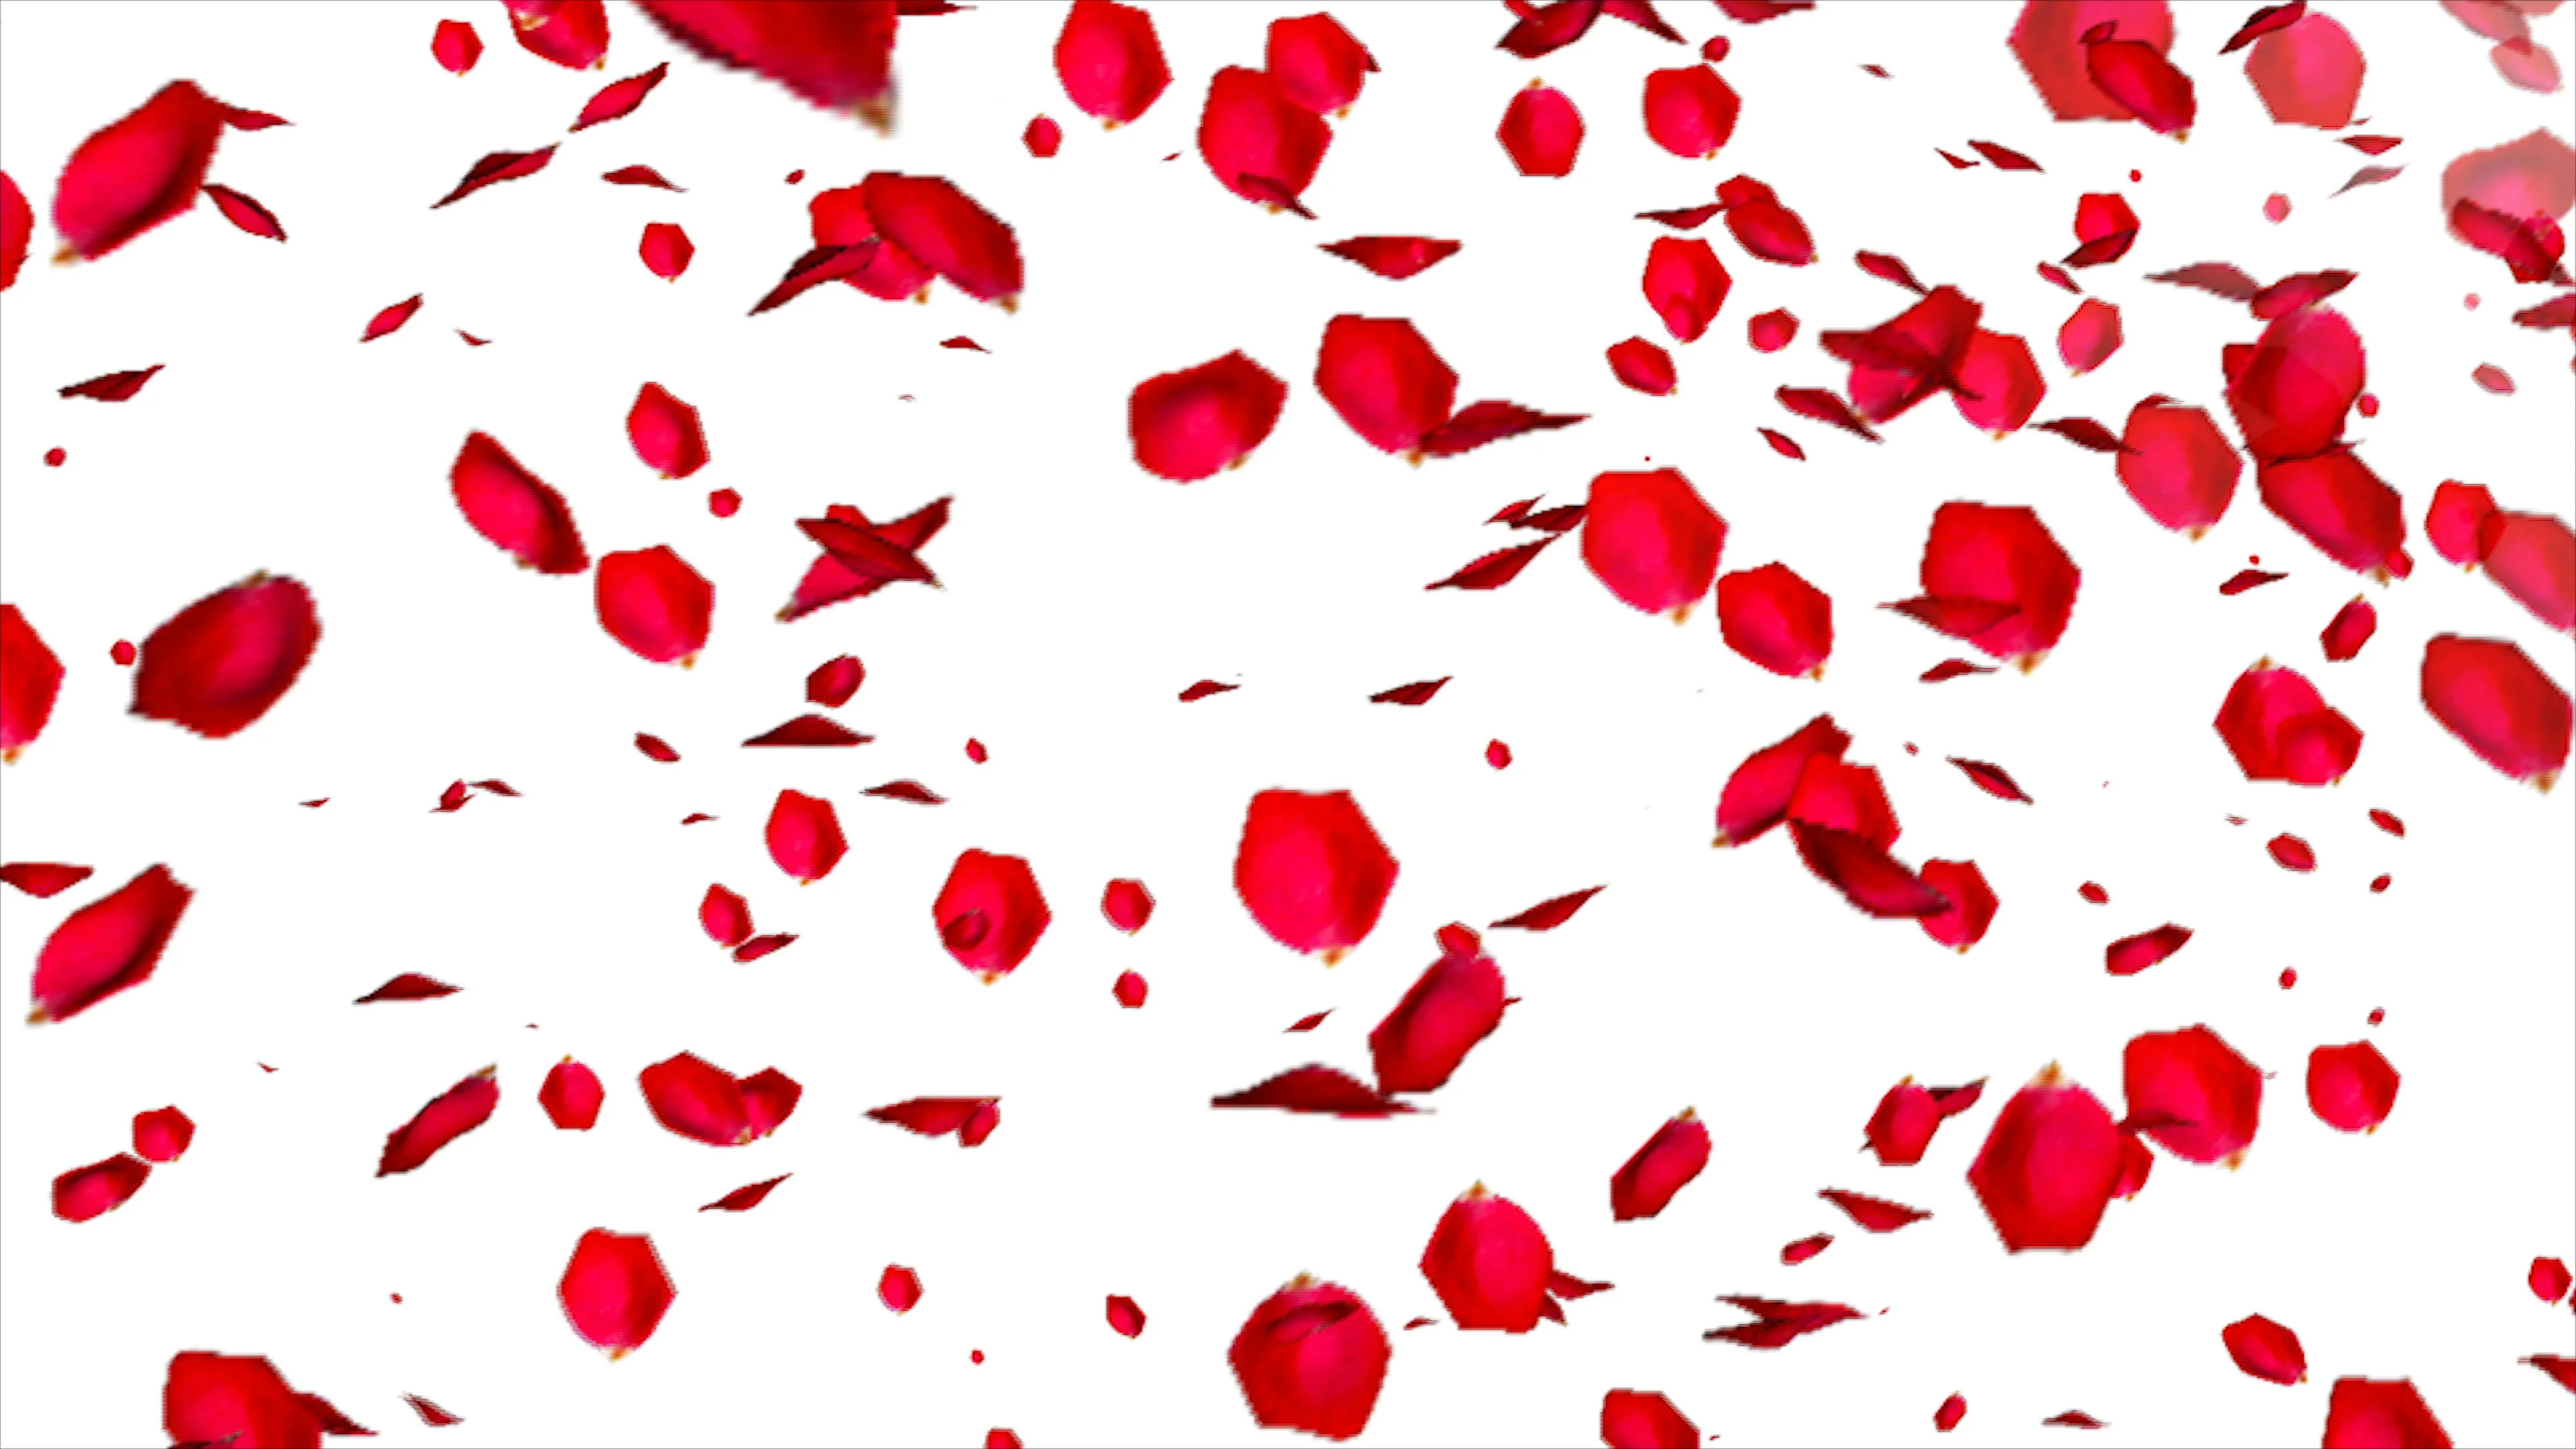 Falling Rose petals on white background | Stock Video | Pond5